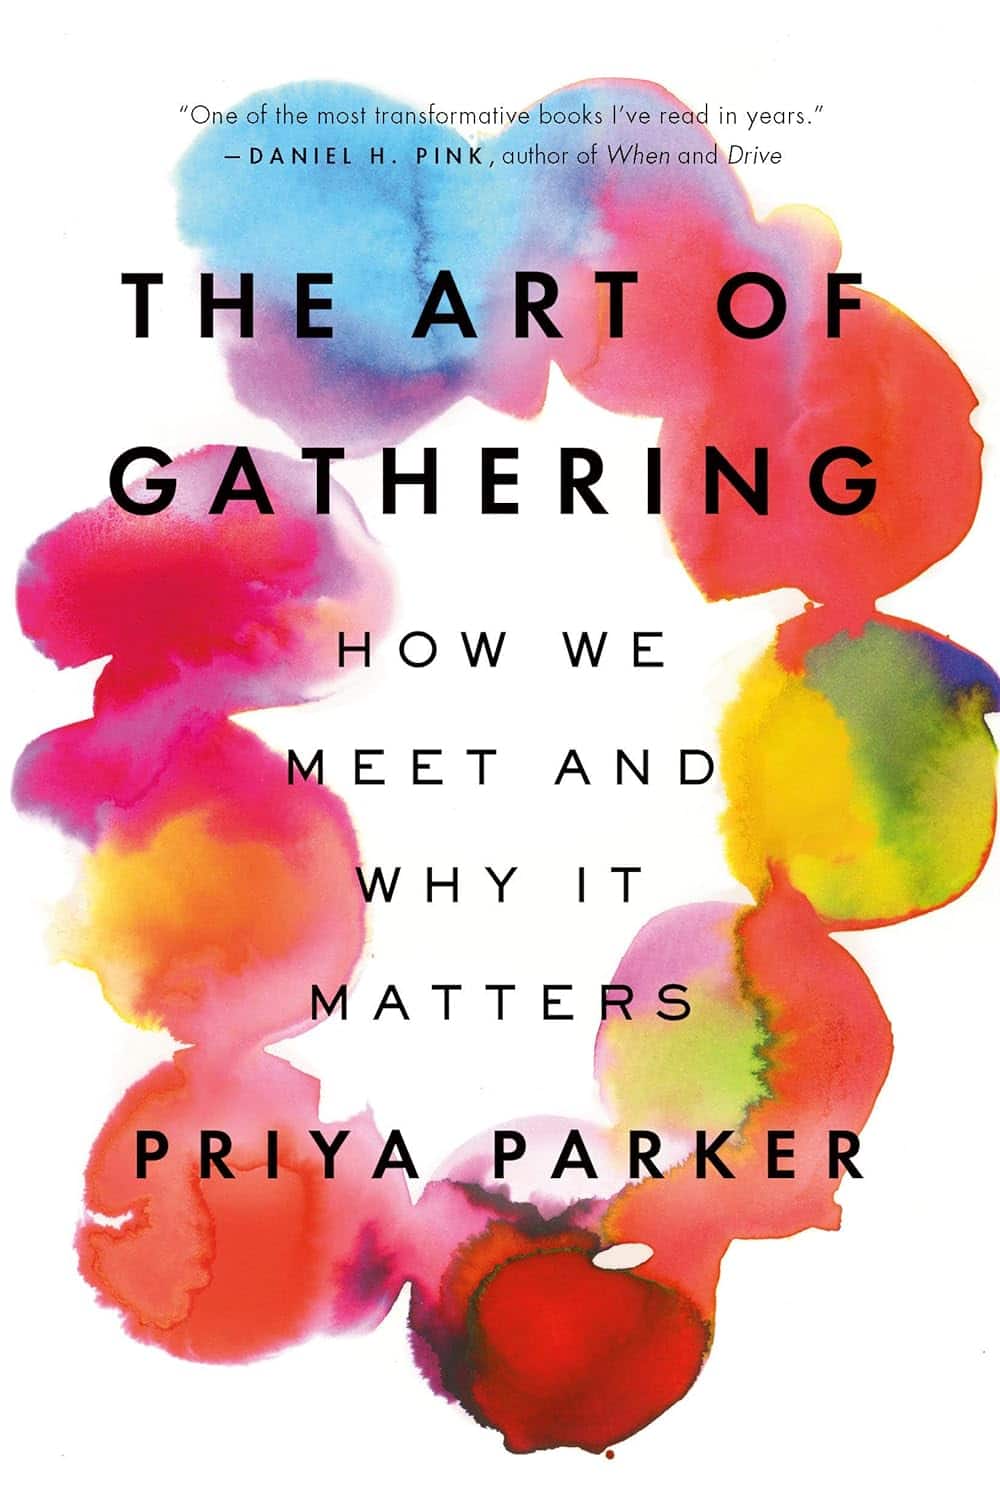 This image shows the cover art of the fundraising book The Art of Gathering: How We Meet and Why It Matters by Priya Parker.